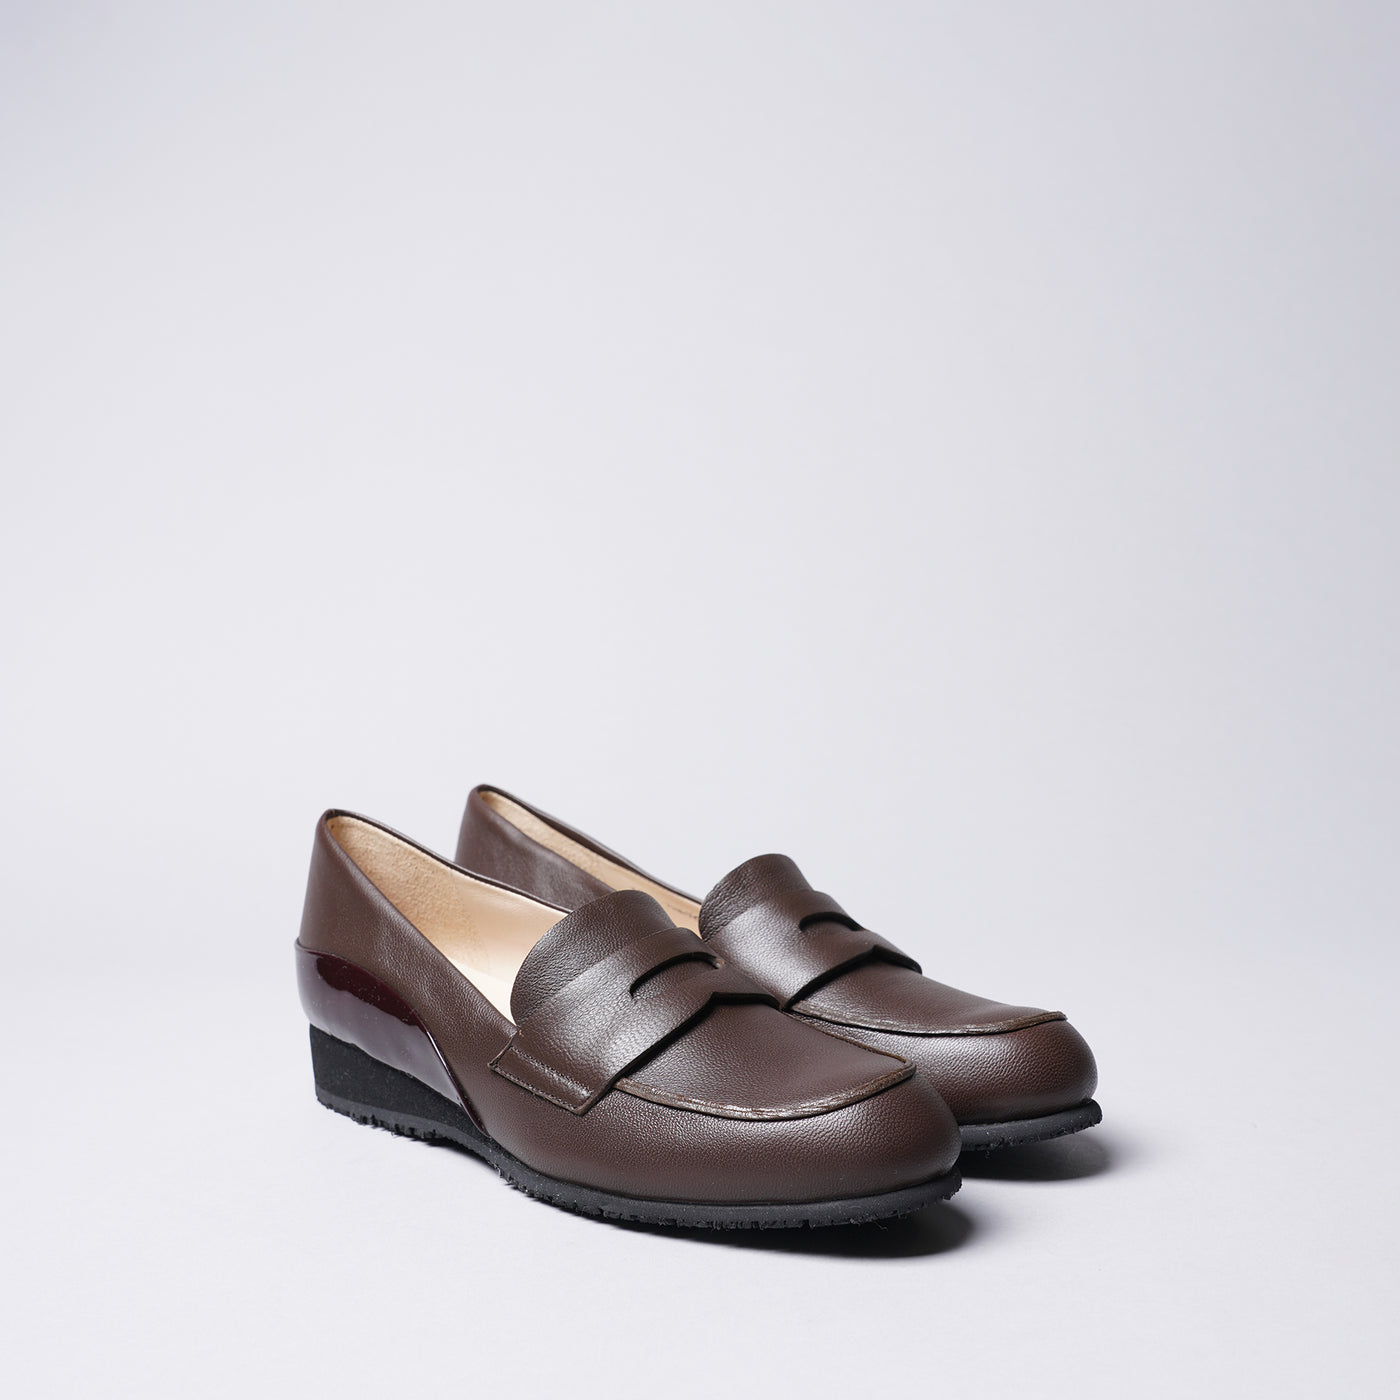 <IUI> Loafer / Grey x White